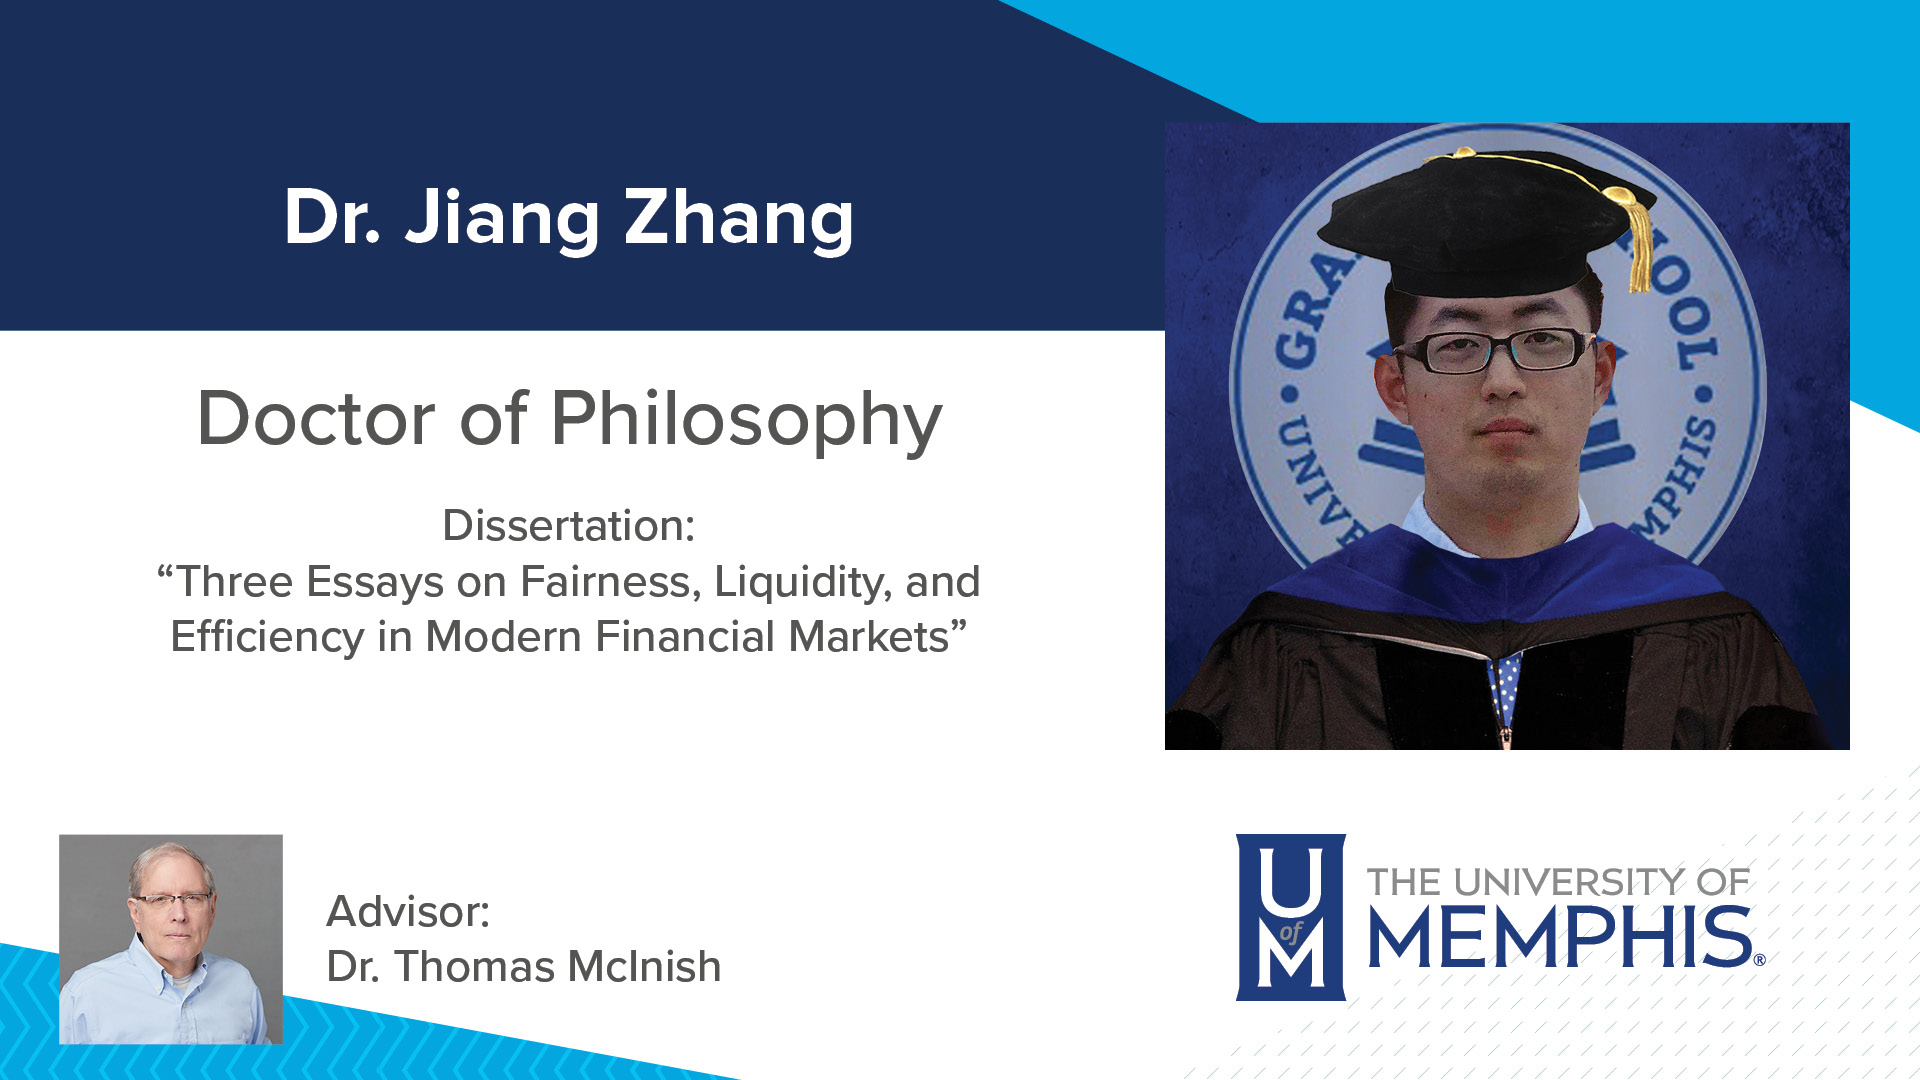 Dr. Jiang Zhang Dissertation: “Three Essays on Fairness, Liquidity, and Efficiency in Modern Financial Markets” Major Professor: Dr. Thomas McInish